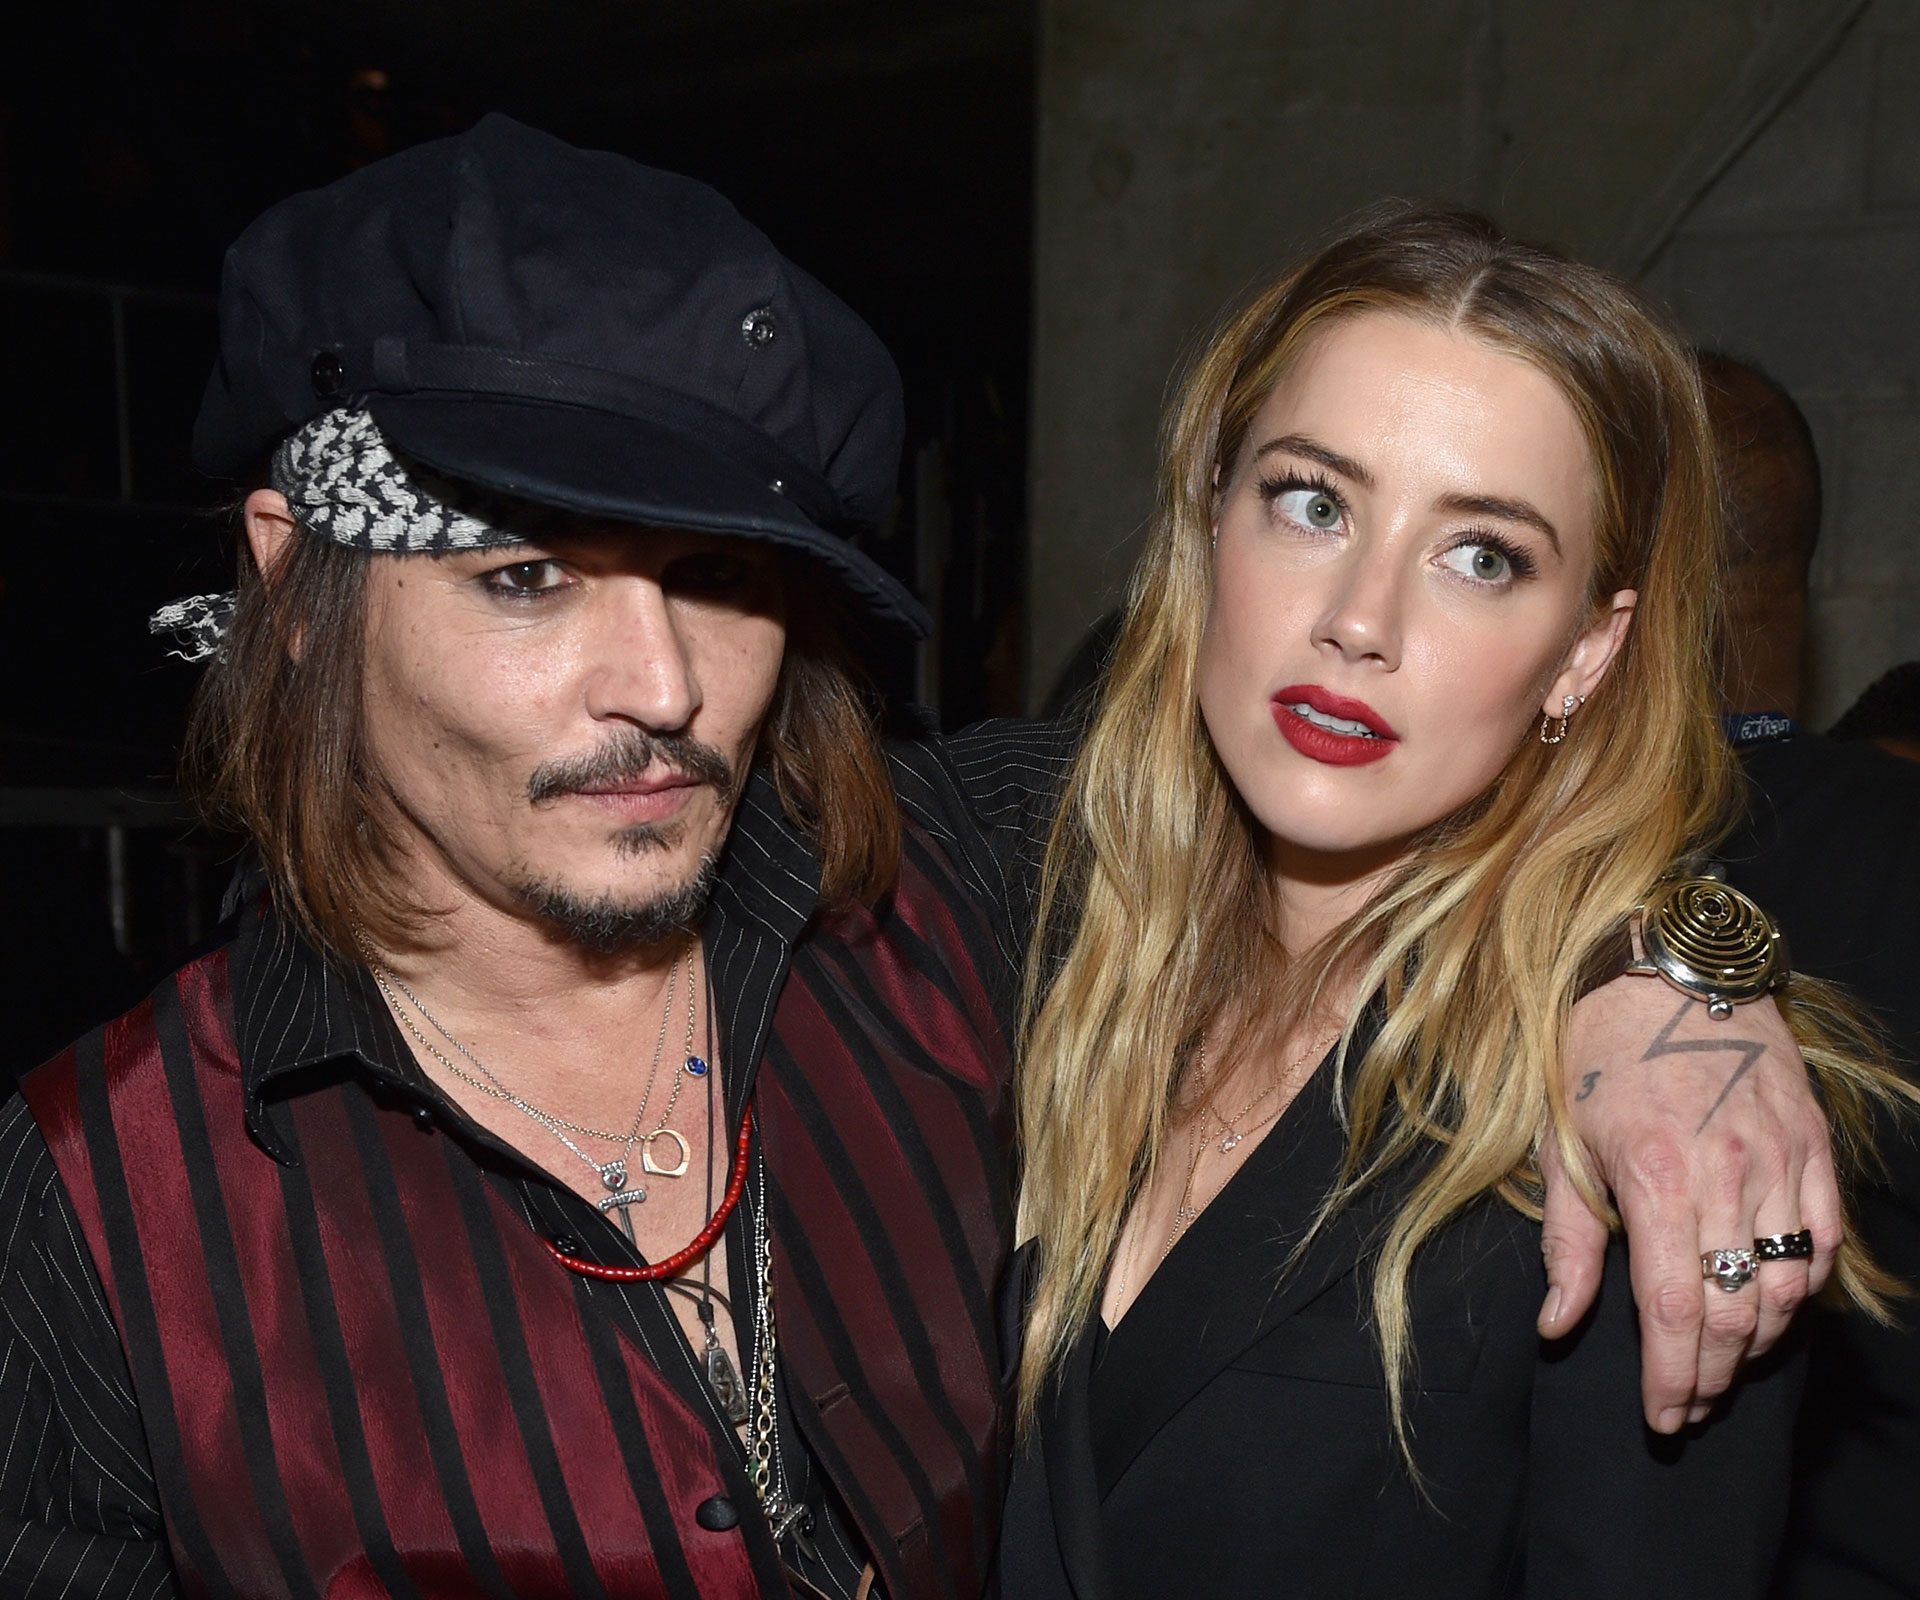 Depp’s daughter breaks silence on violence claims